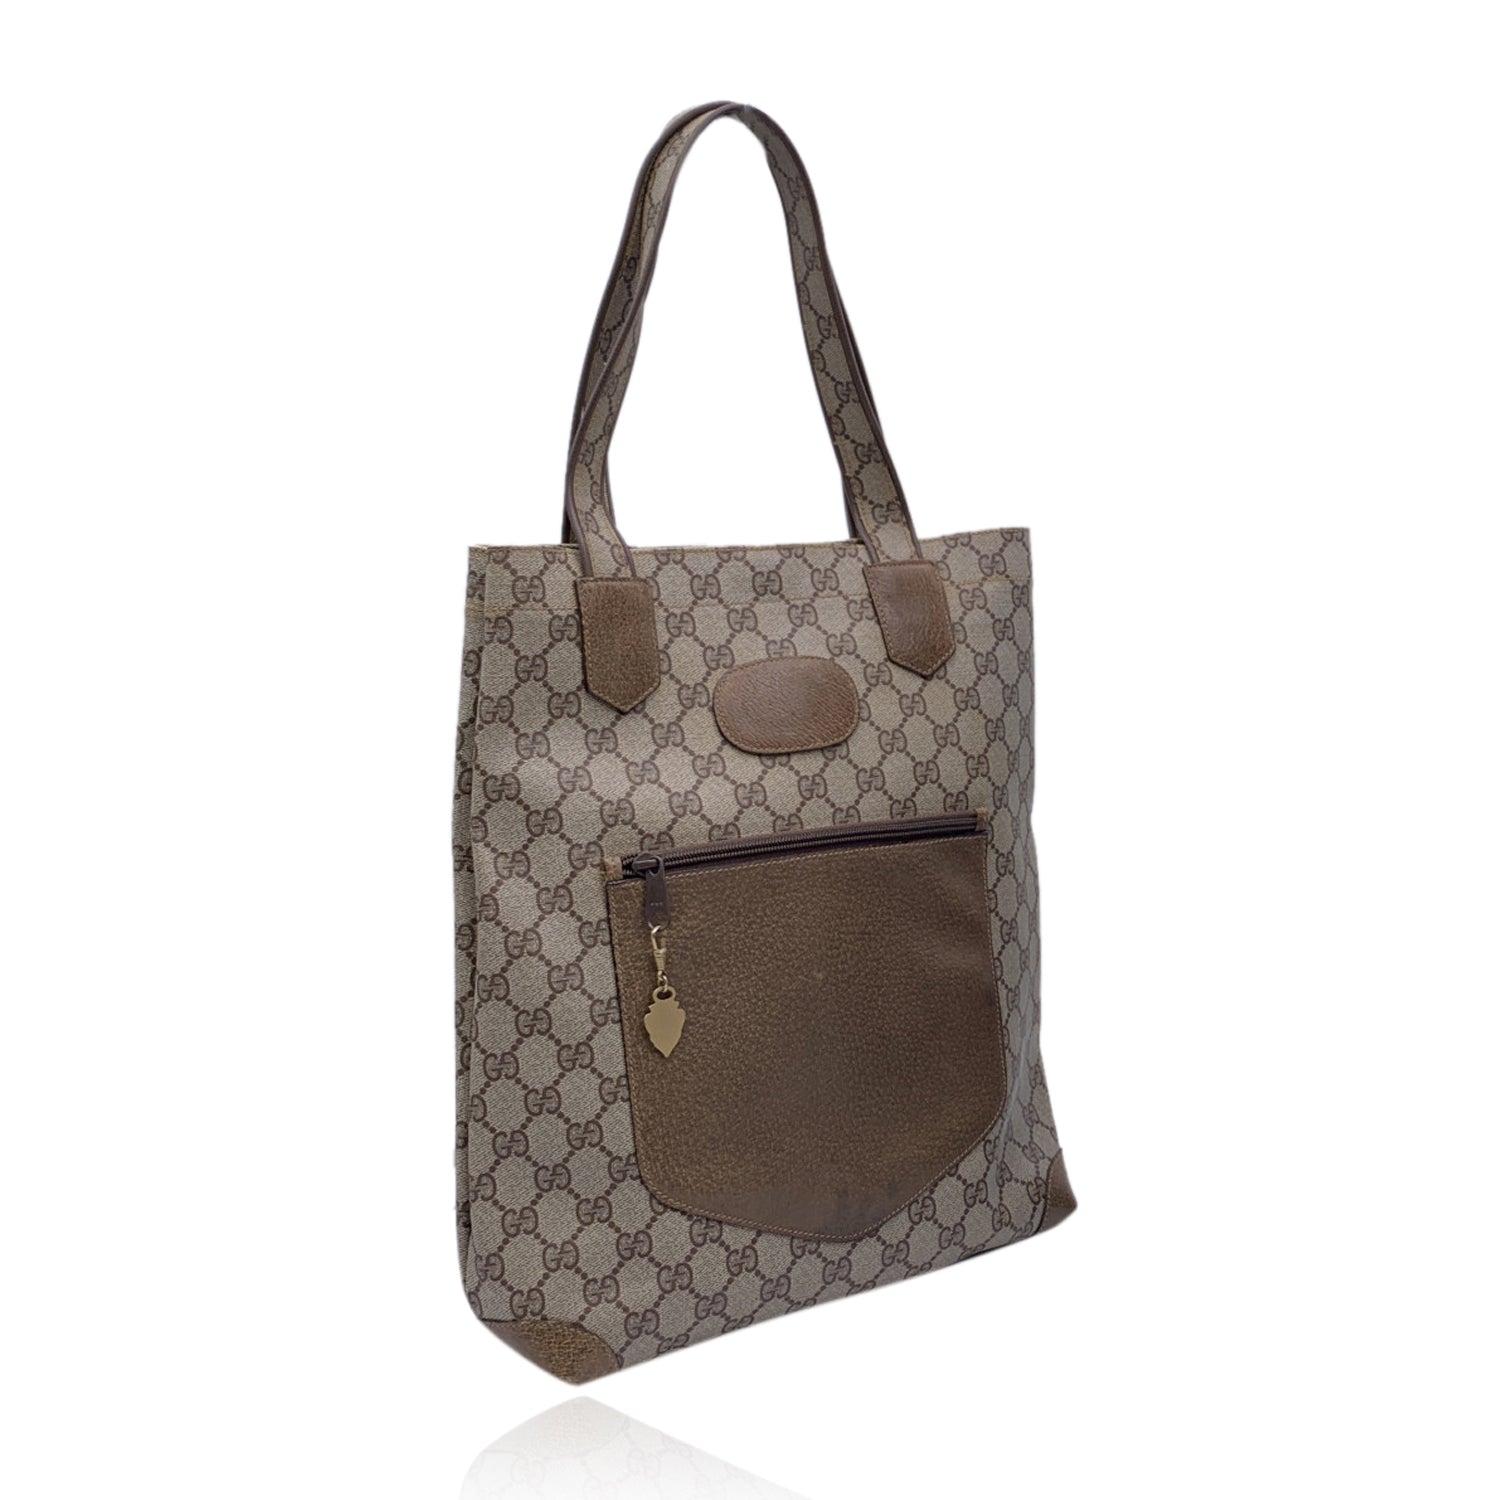 Gucci Vintage Light Brown GG Monogram Canvas Shopping Bag Tote im Zustand „Gut“ im Angebot in Rome, Rome